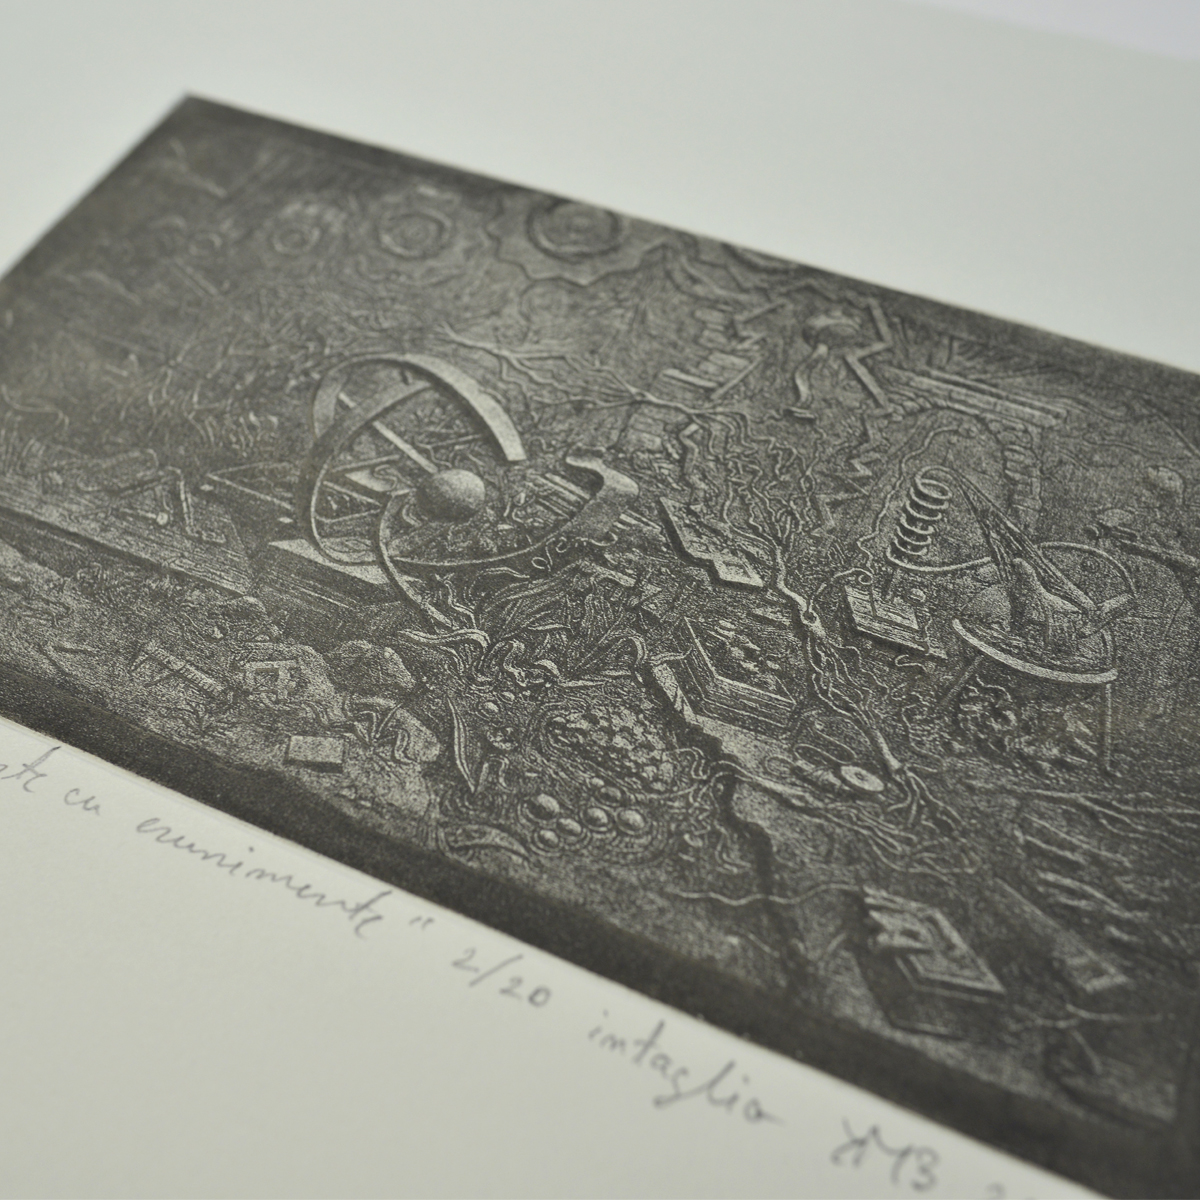 34 x 45cm, mezzotint on Fabriano paper 300gr/sqm, printed by Cristian Opris, edition 1/20+AP, 2015